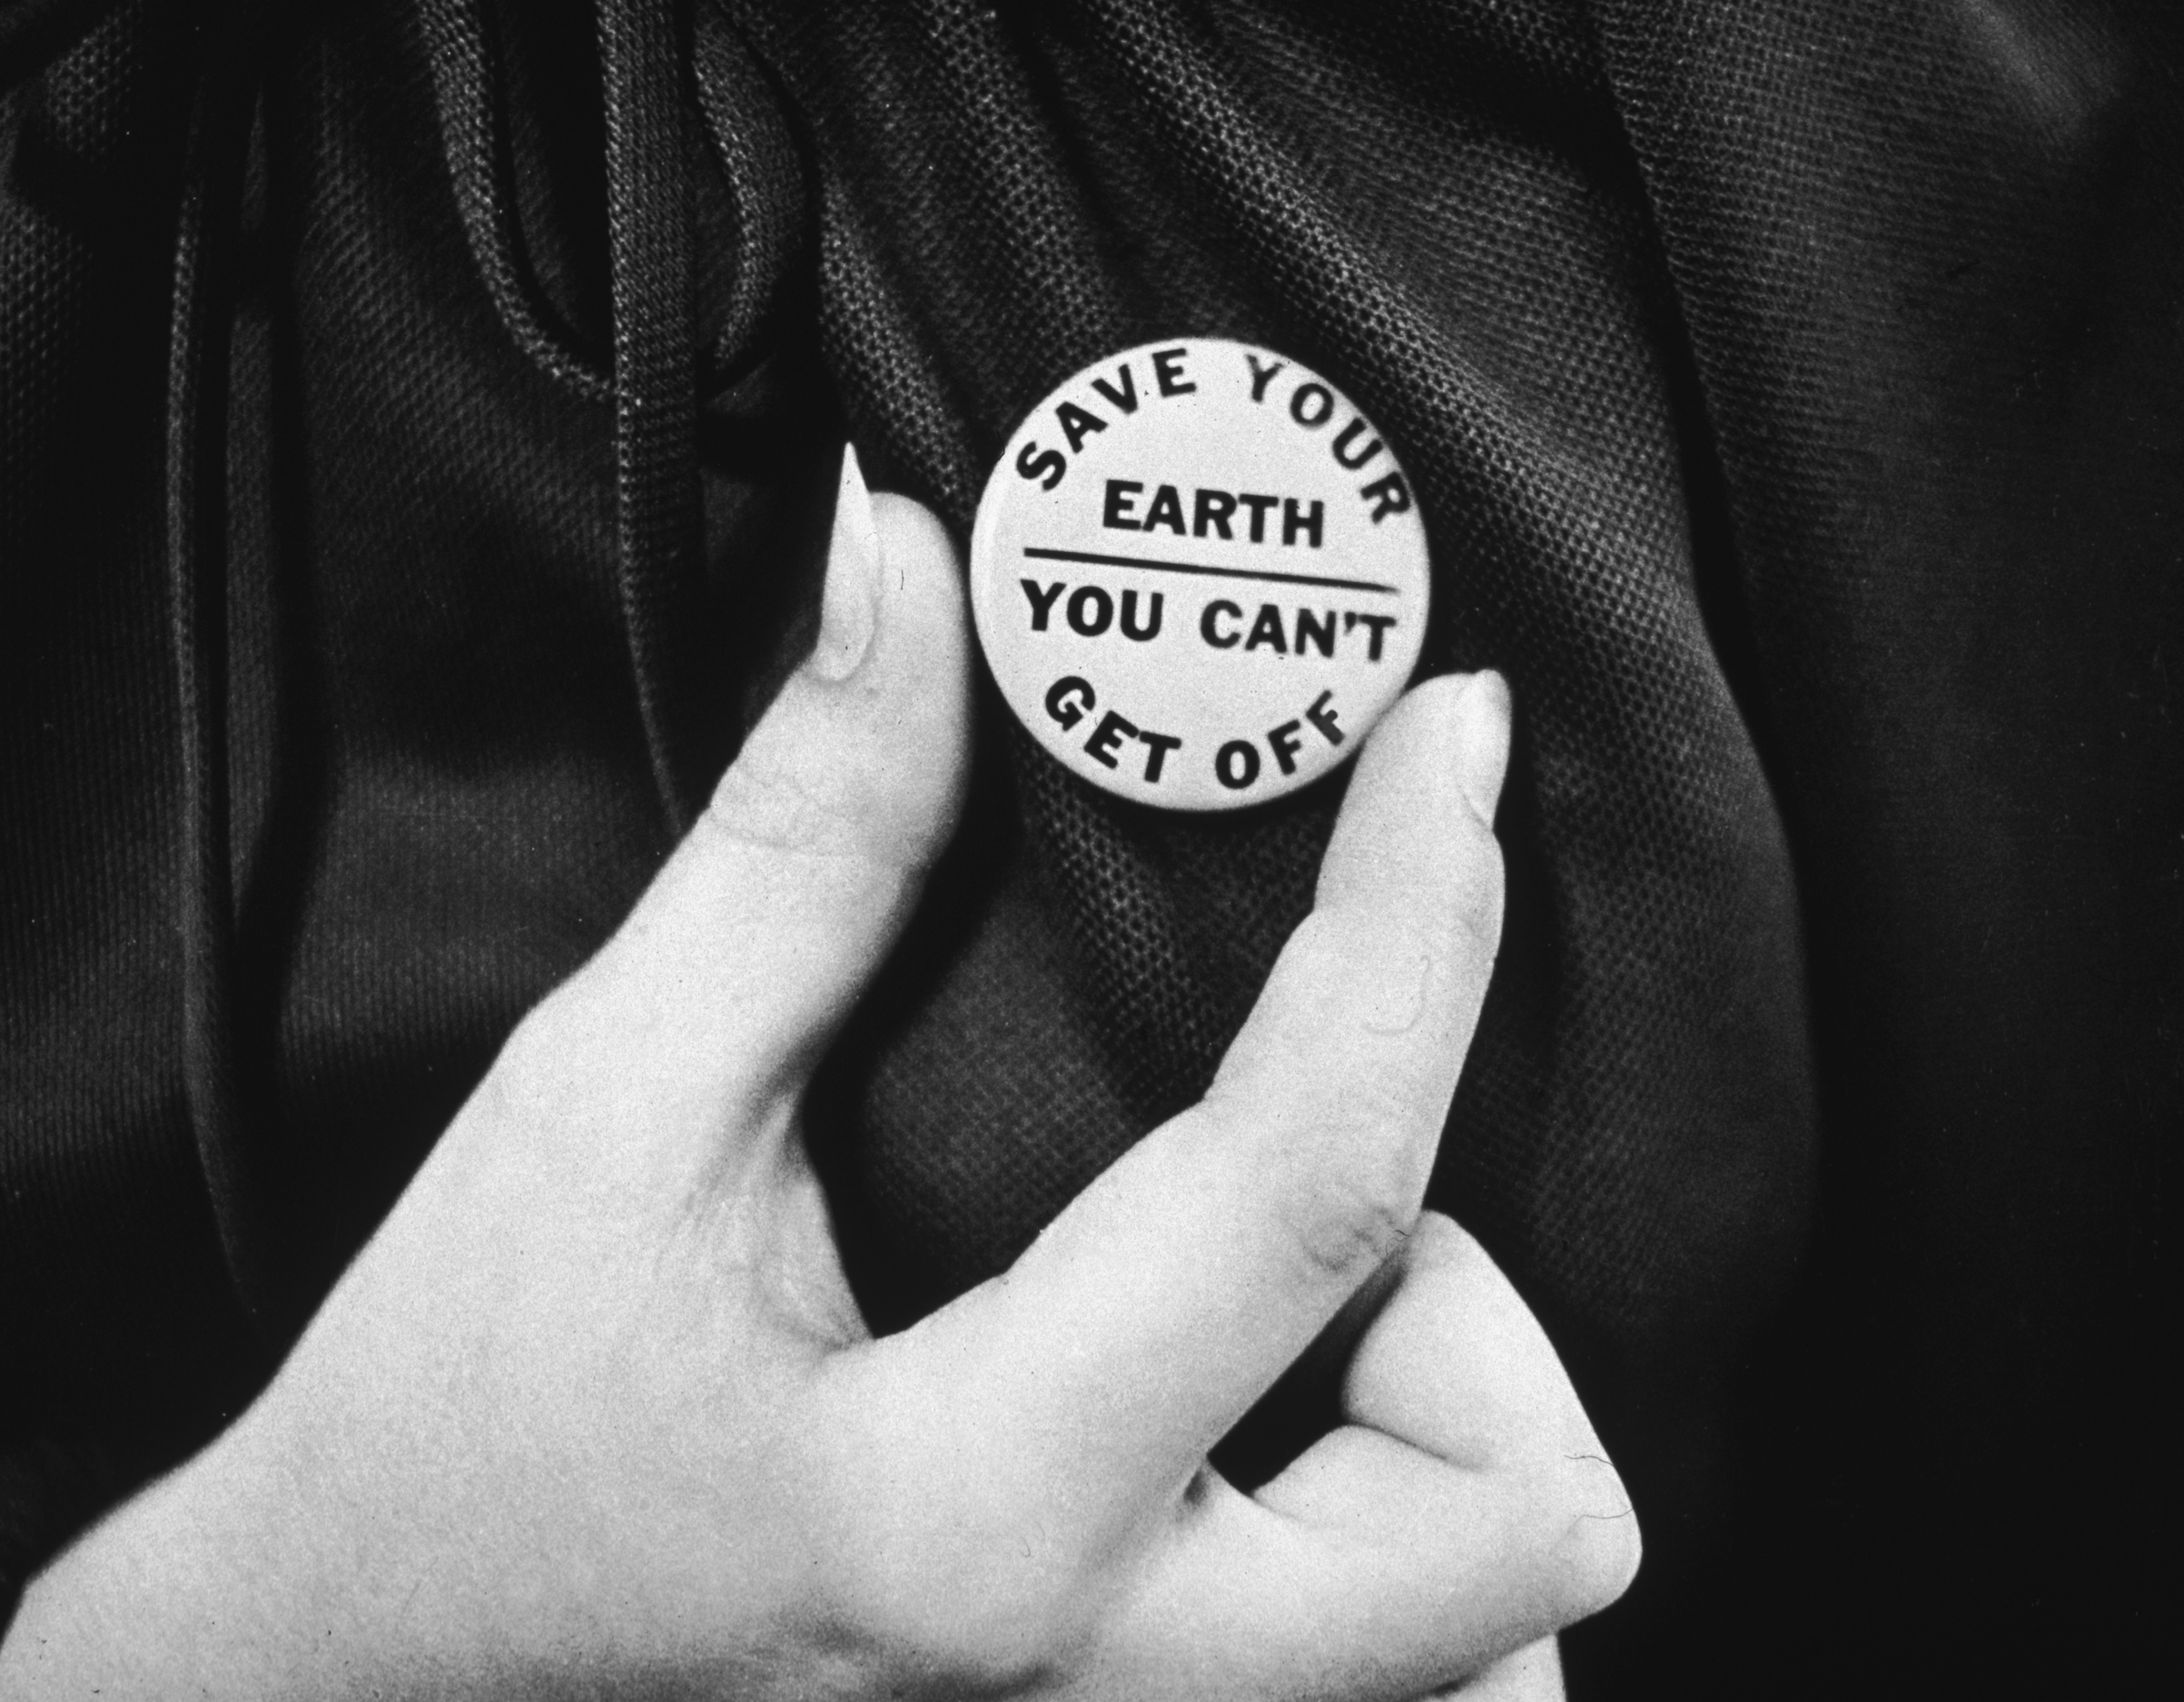 circa 1970:  A close-up of a hand holding up an Earth Day button. (Getty Images)